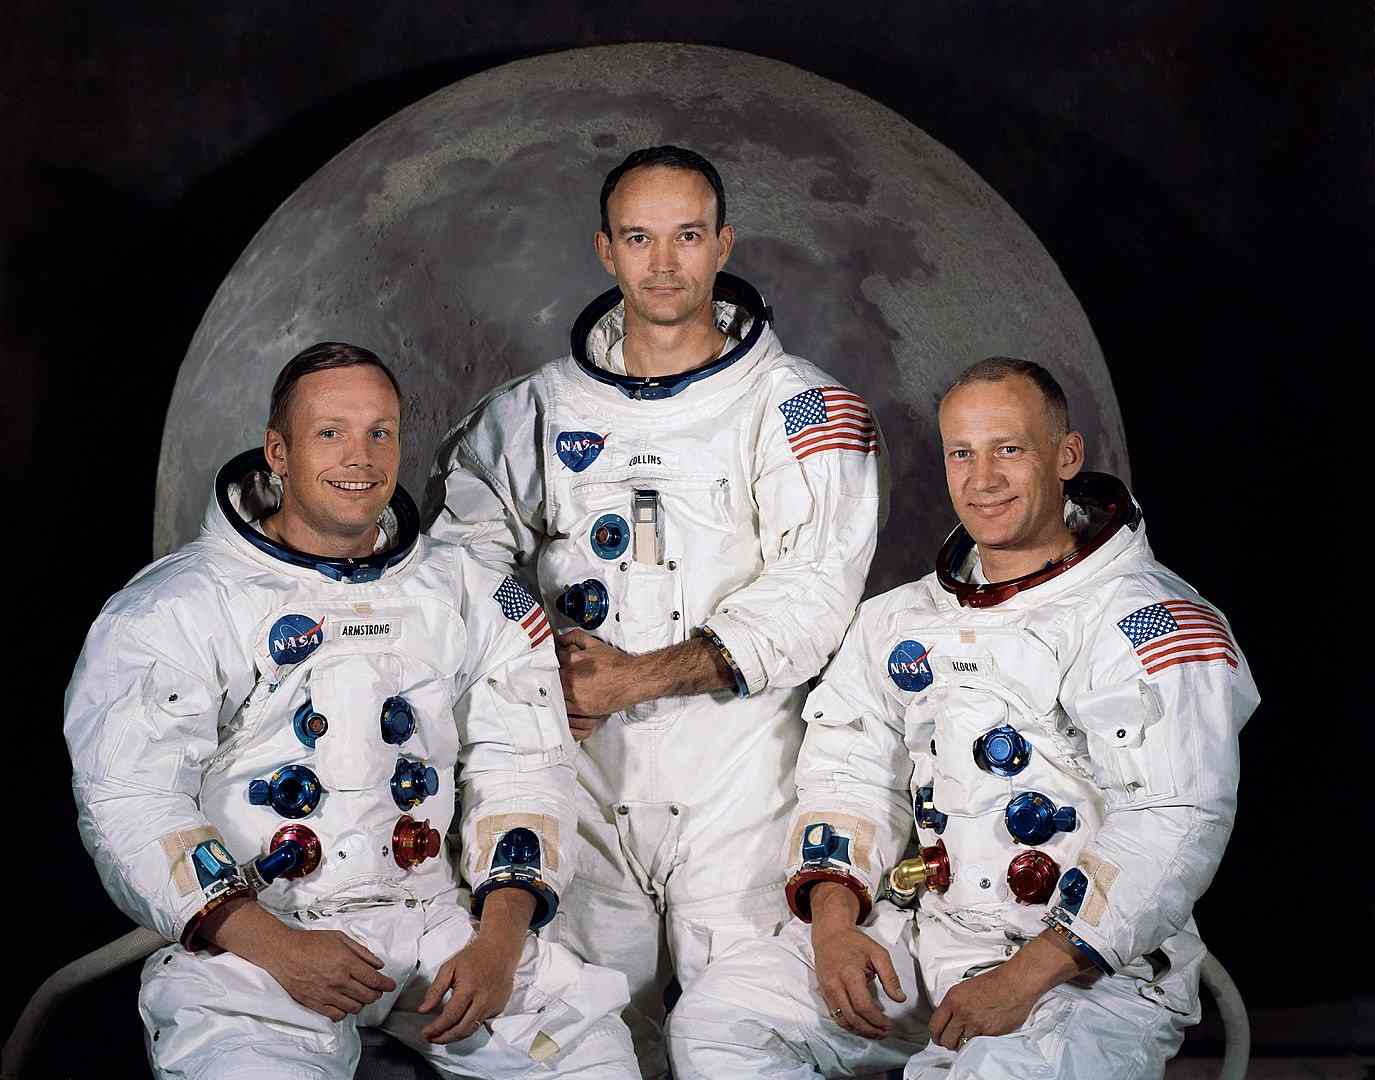 The Apollo 11 lunar landing mission crew, pictured from left to right, Neil A. Armstrong, commander; Michael Collins, command module pilot; and Buzz Aldrin, lunar module pilot. Image: NASA.